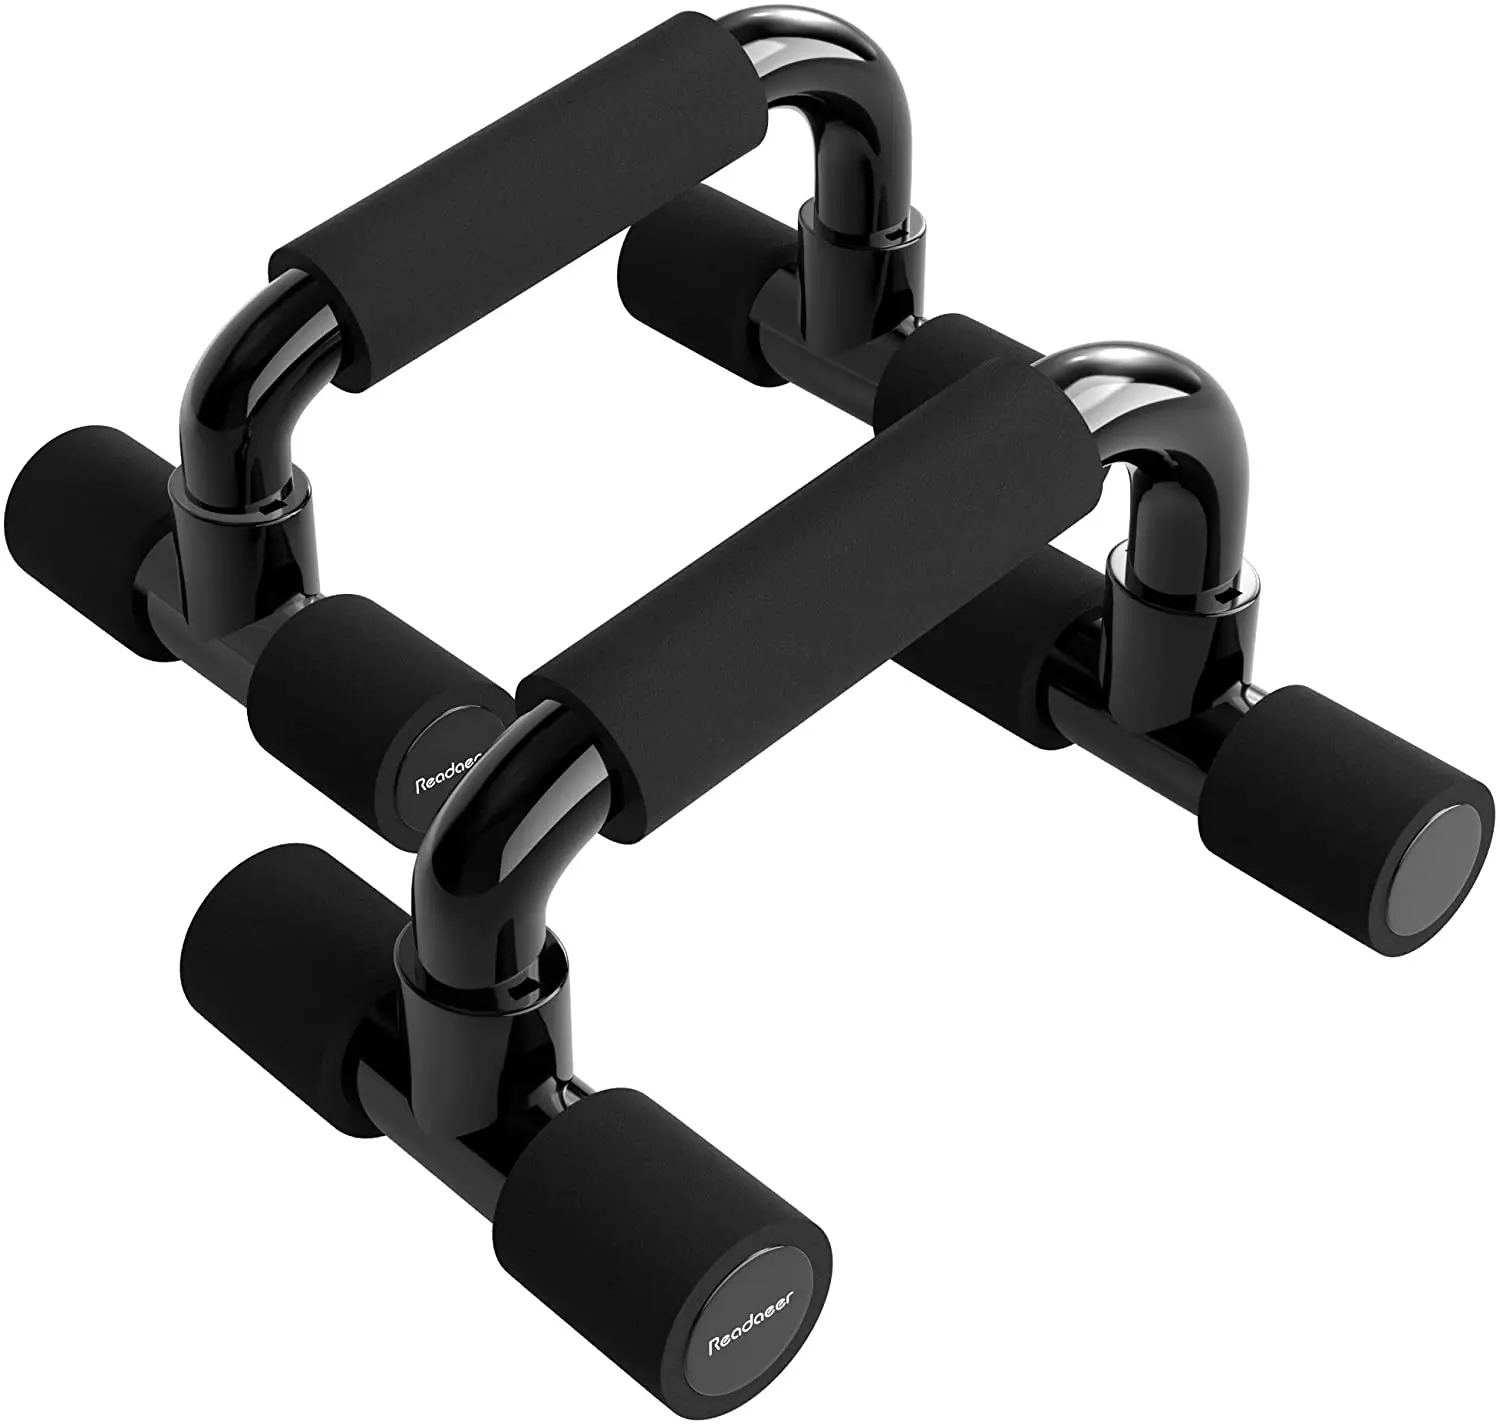 

Push Up Bars Strength Training - Ergonomic Workout Stands Push-up Bracket Board with Non-Slip Rubber Base and Cushioned Foam